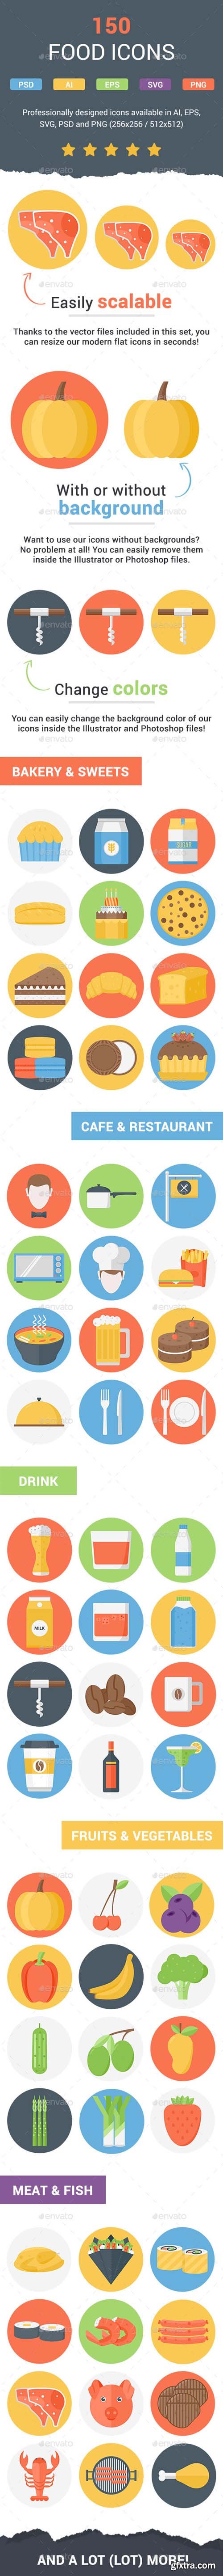 GR - Food Icons 15916186